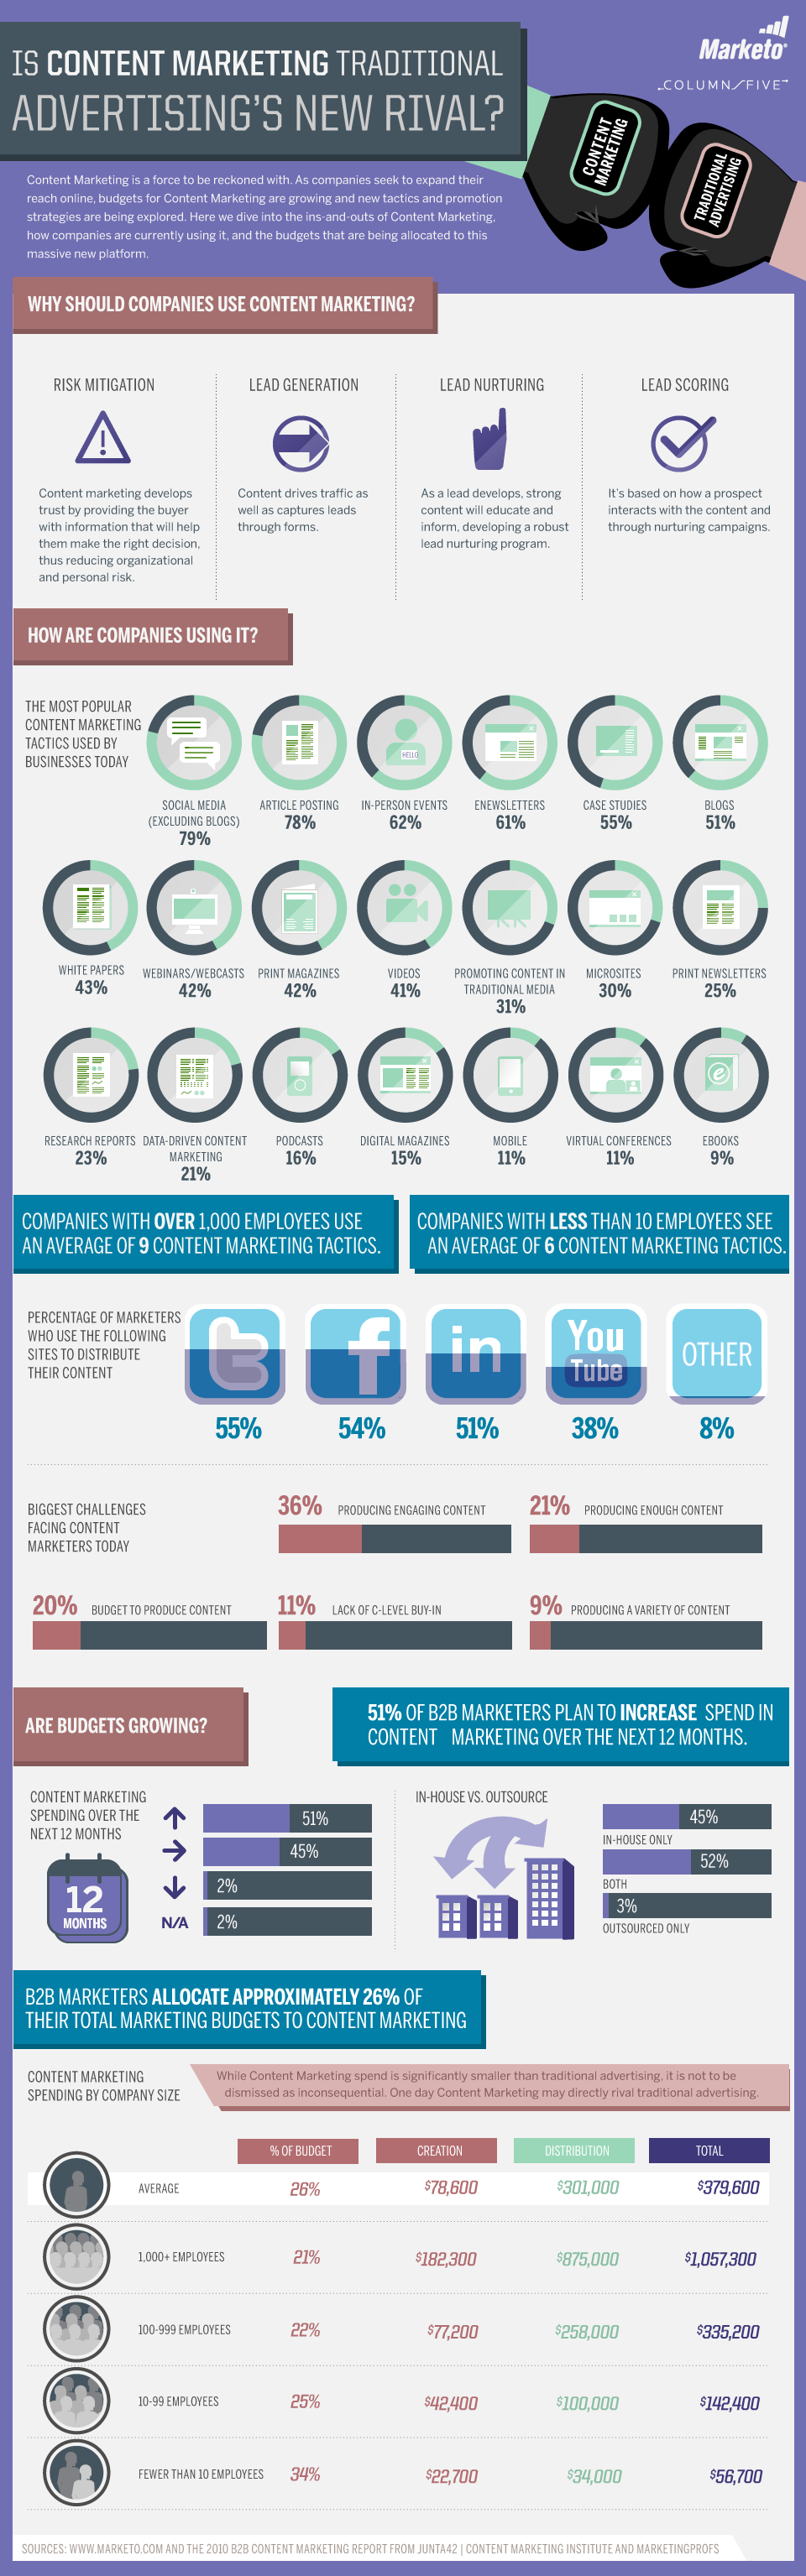 Content-Marketing-Infographic-by-Marketo